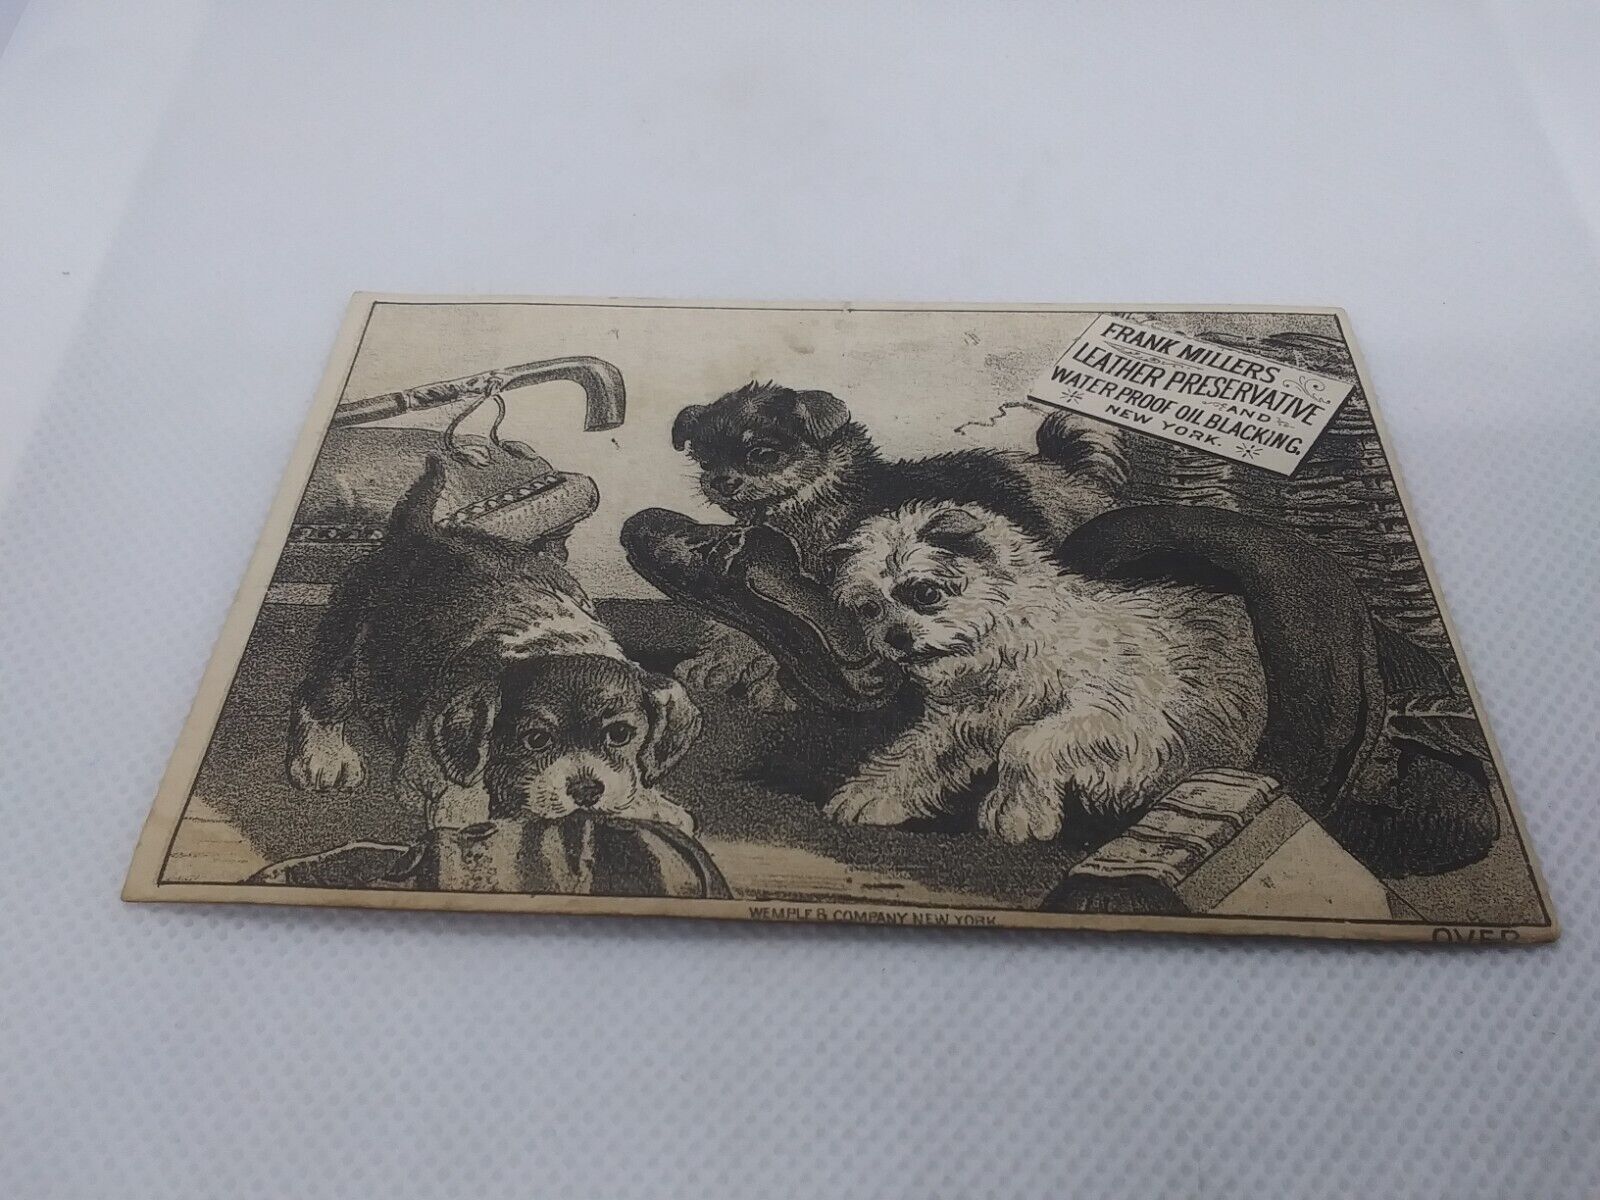 Antique Frank Millers Leather Preservative Waterproof Oil Blacking NY Trade Card